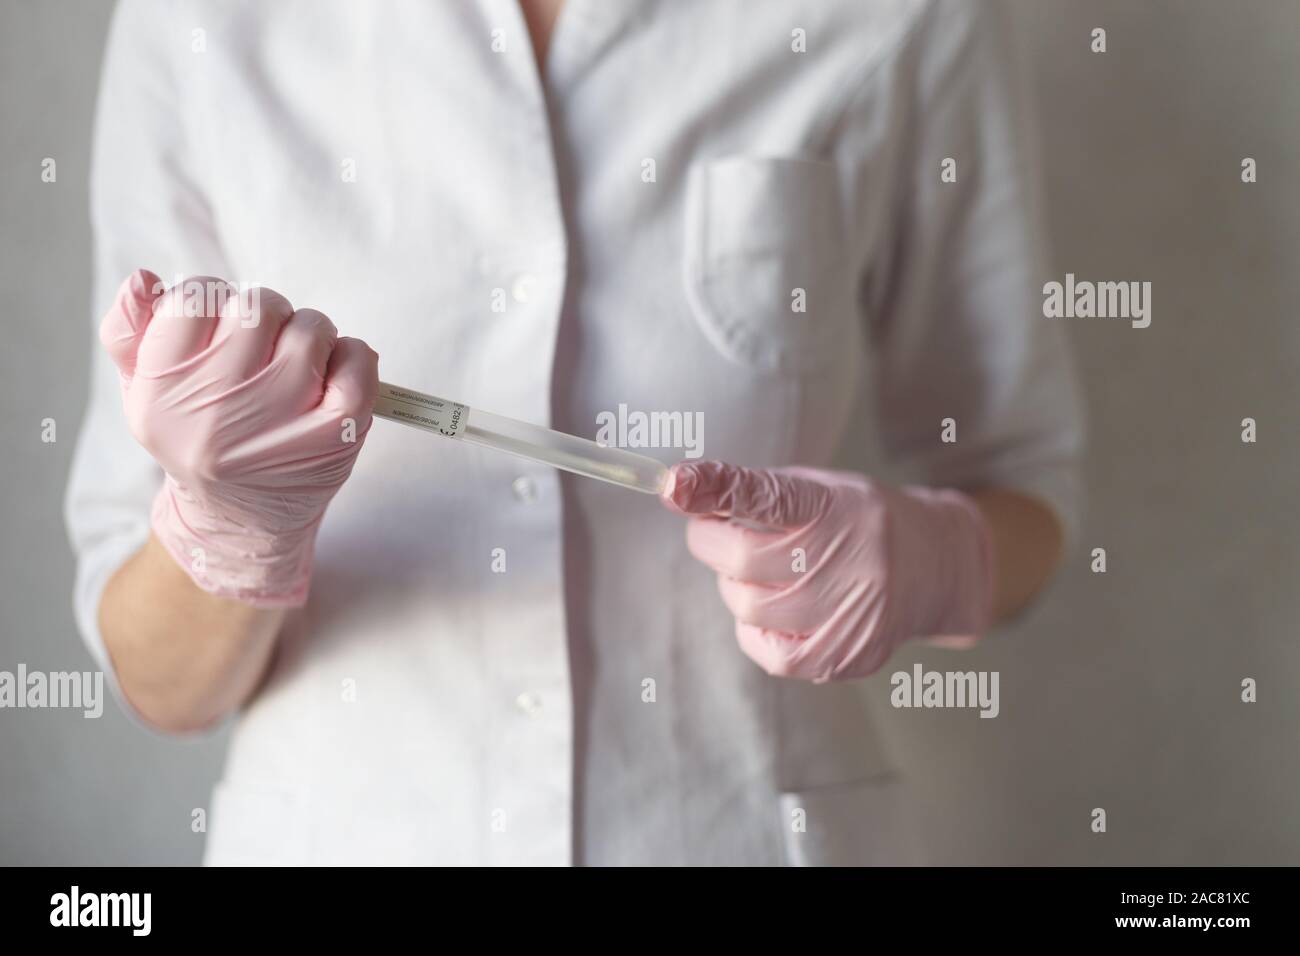 A gloved hand holding a medical swab tube Stock Photo